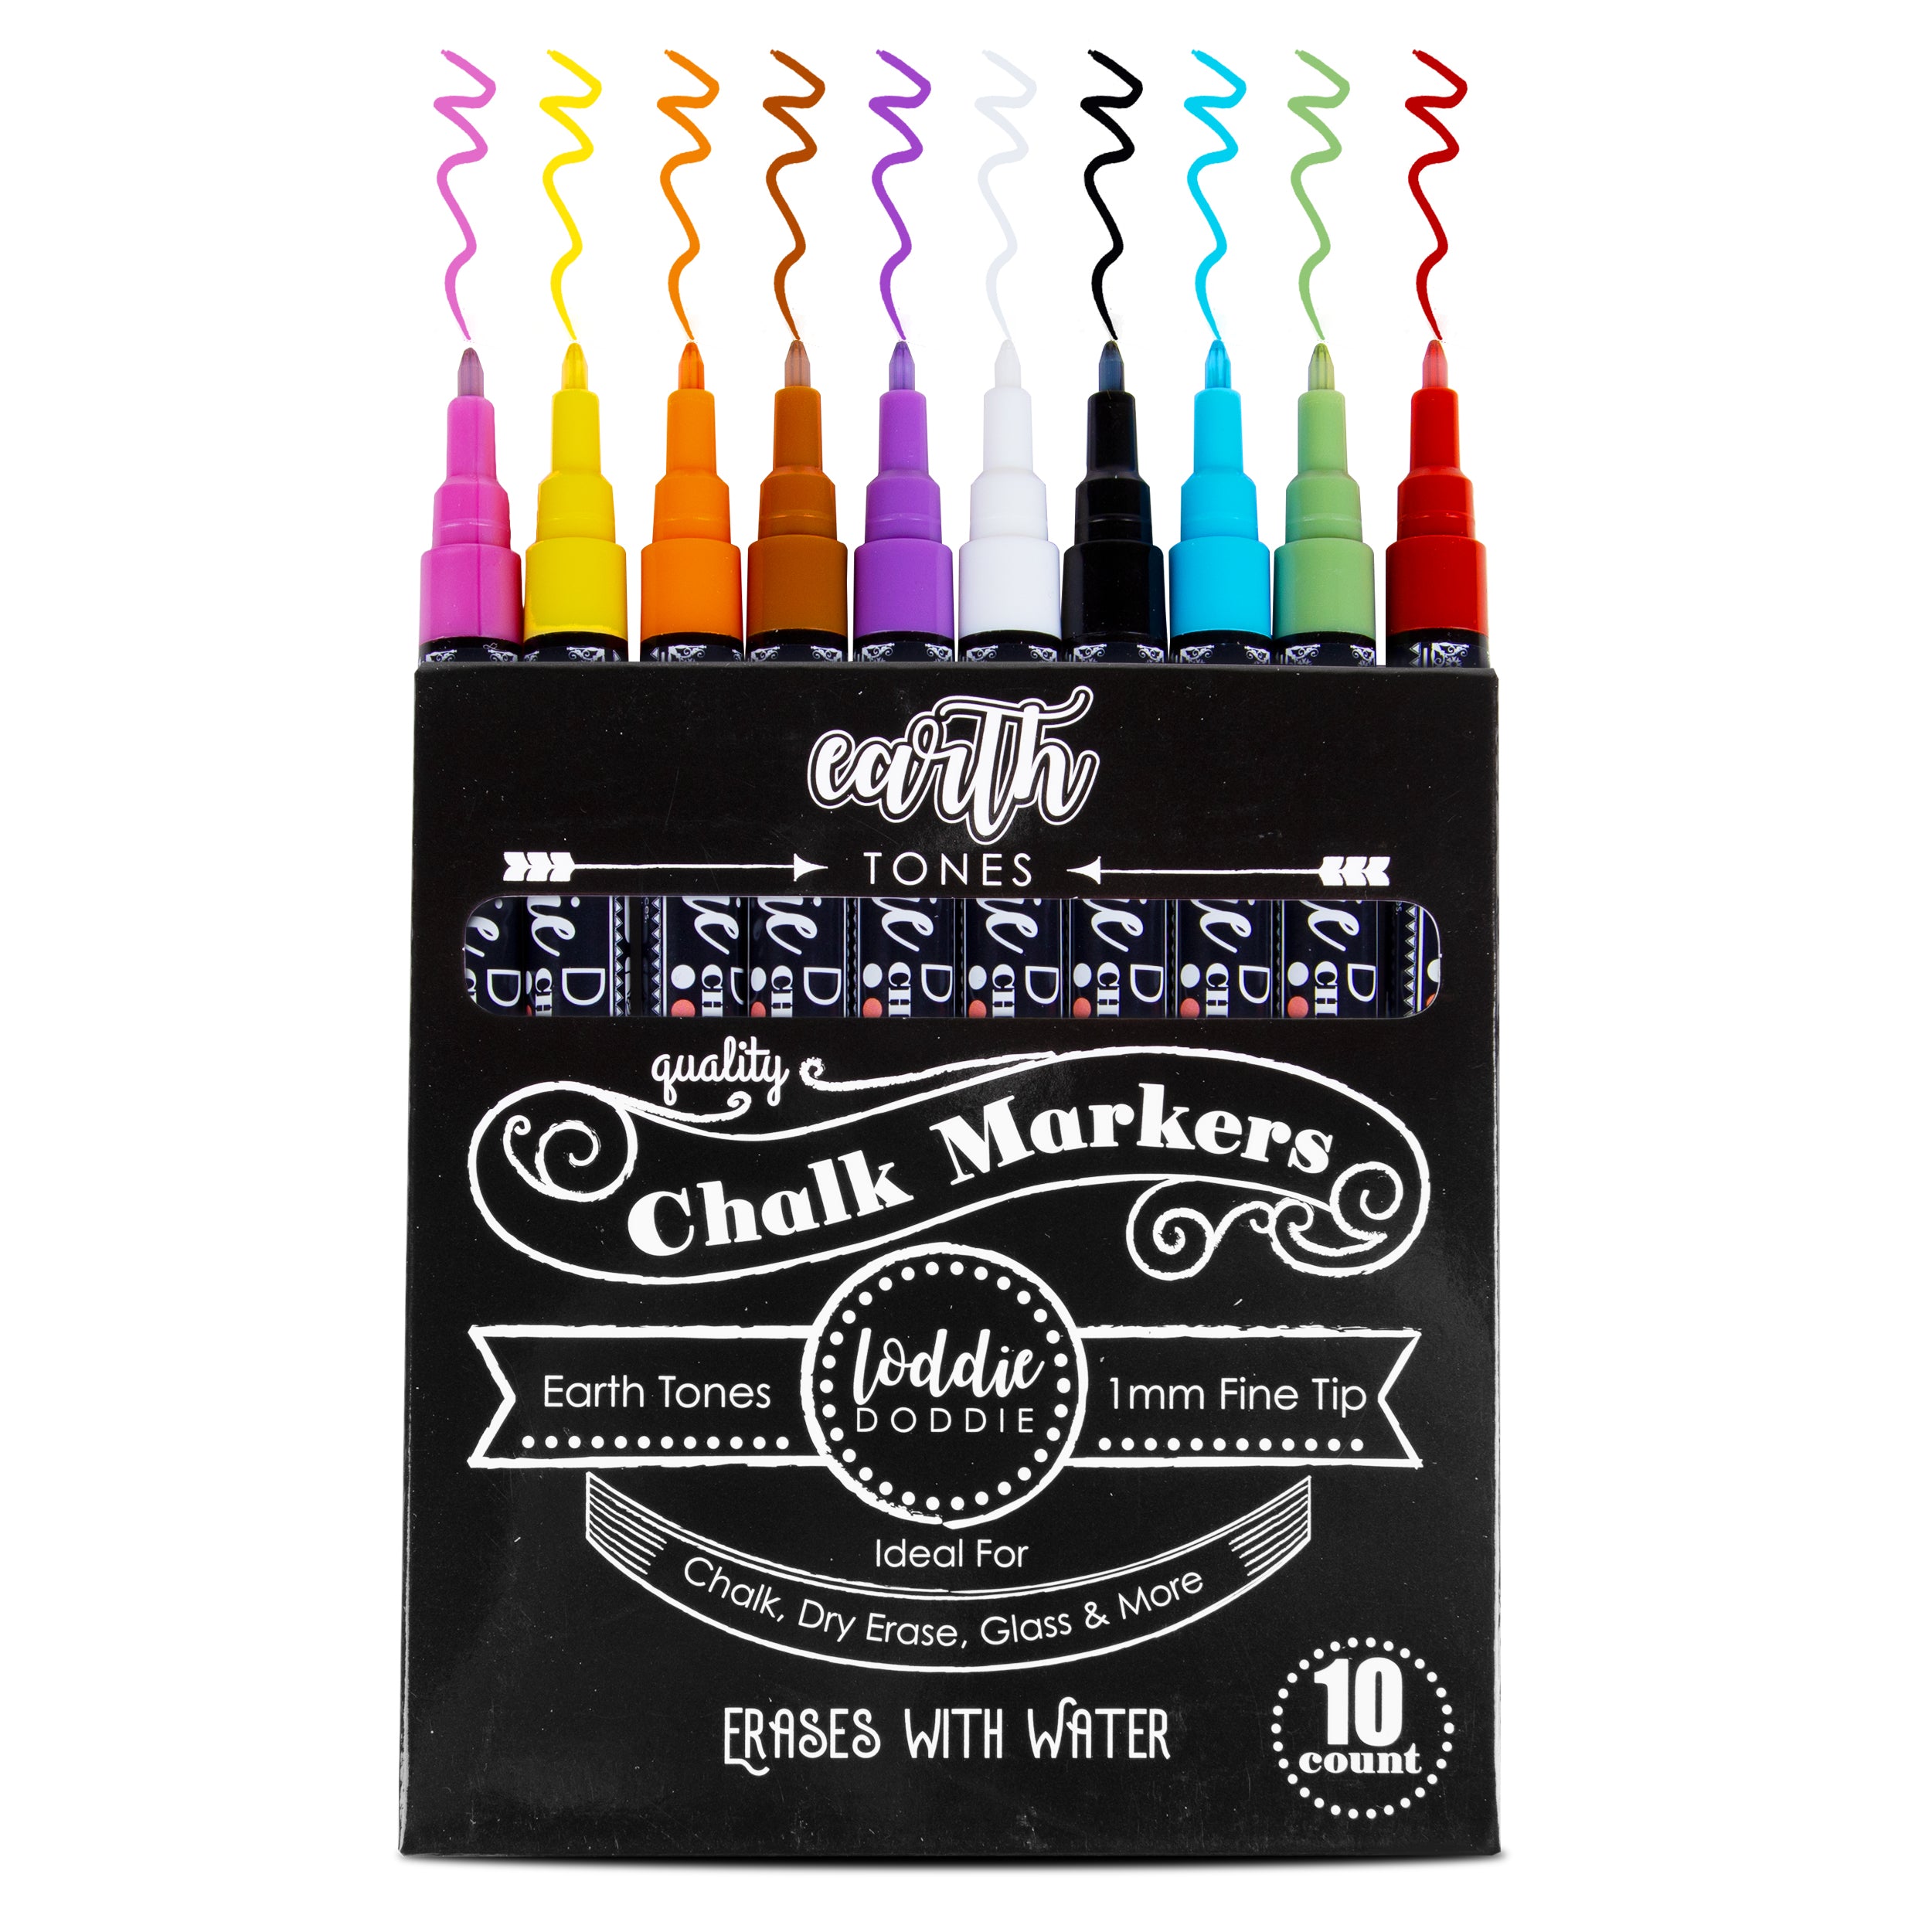  Loddie Doddie Liquid Chalk Markers for Chalkboard - 6mm  Reversible Chisel and Bullet Tips, Chalkboard Markers Erasable, Earth Tones  Chalk Pens 10 Count : Office Products